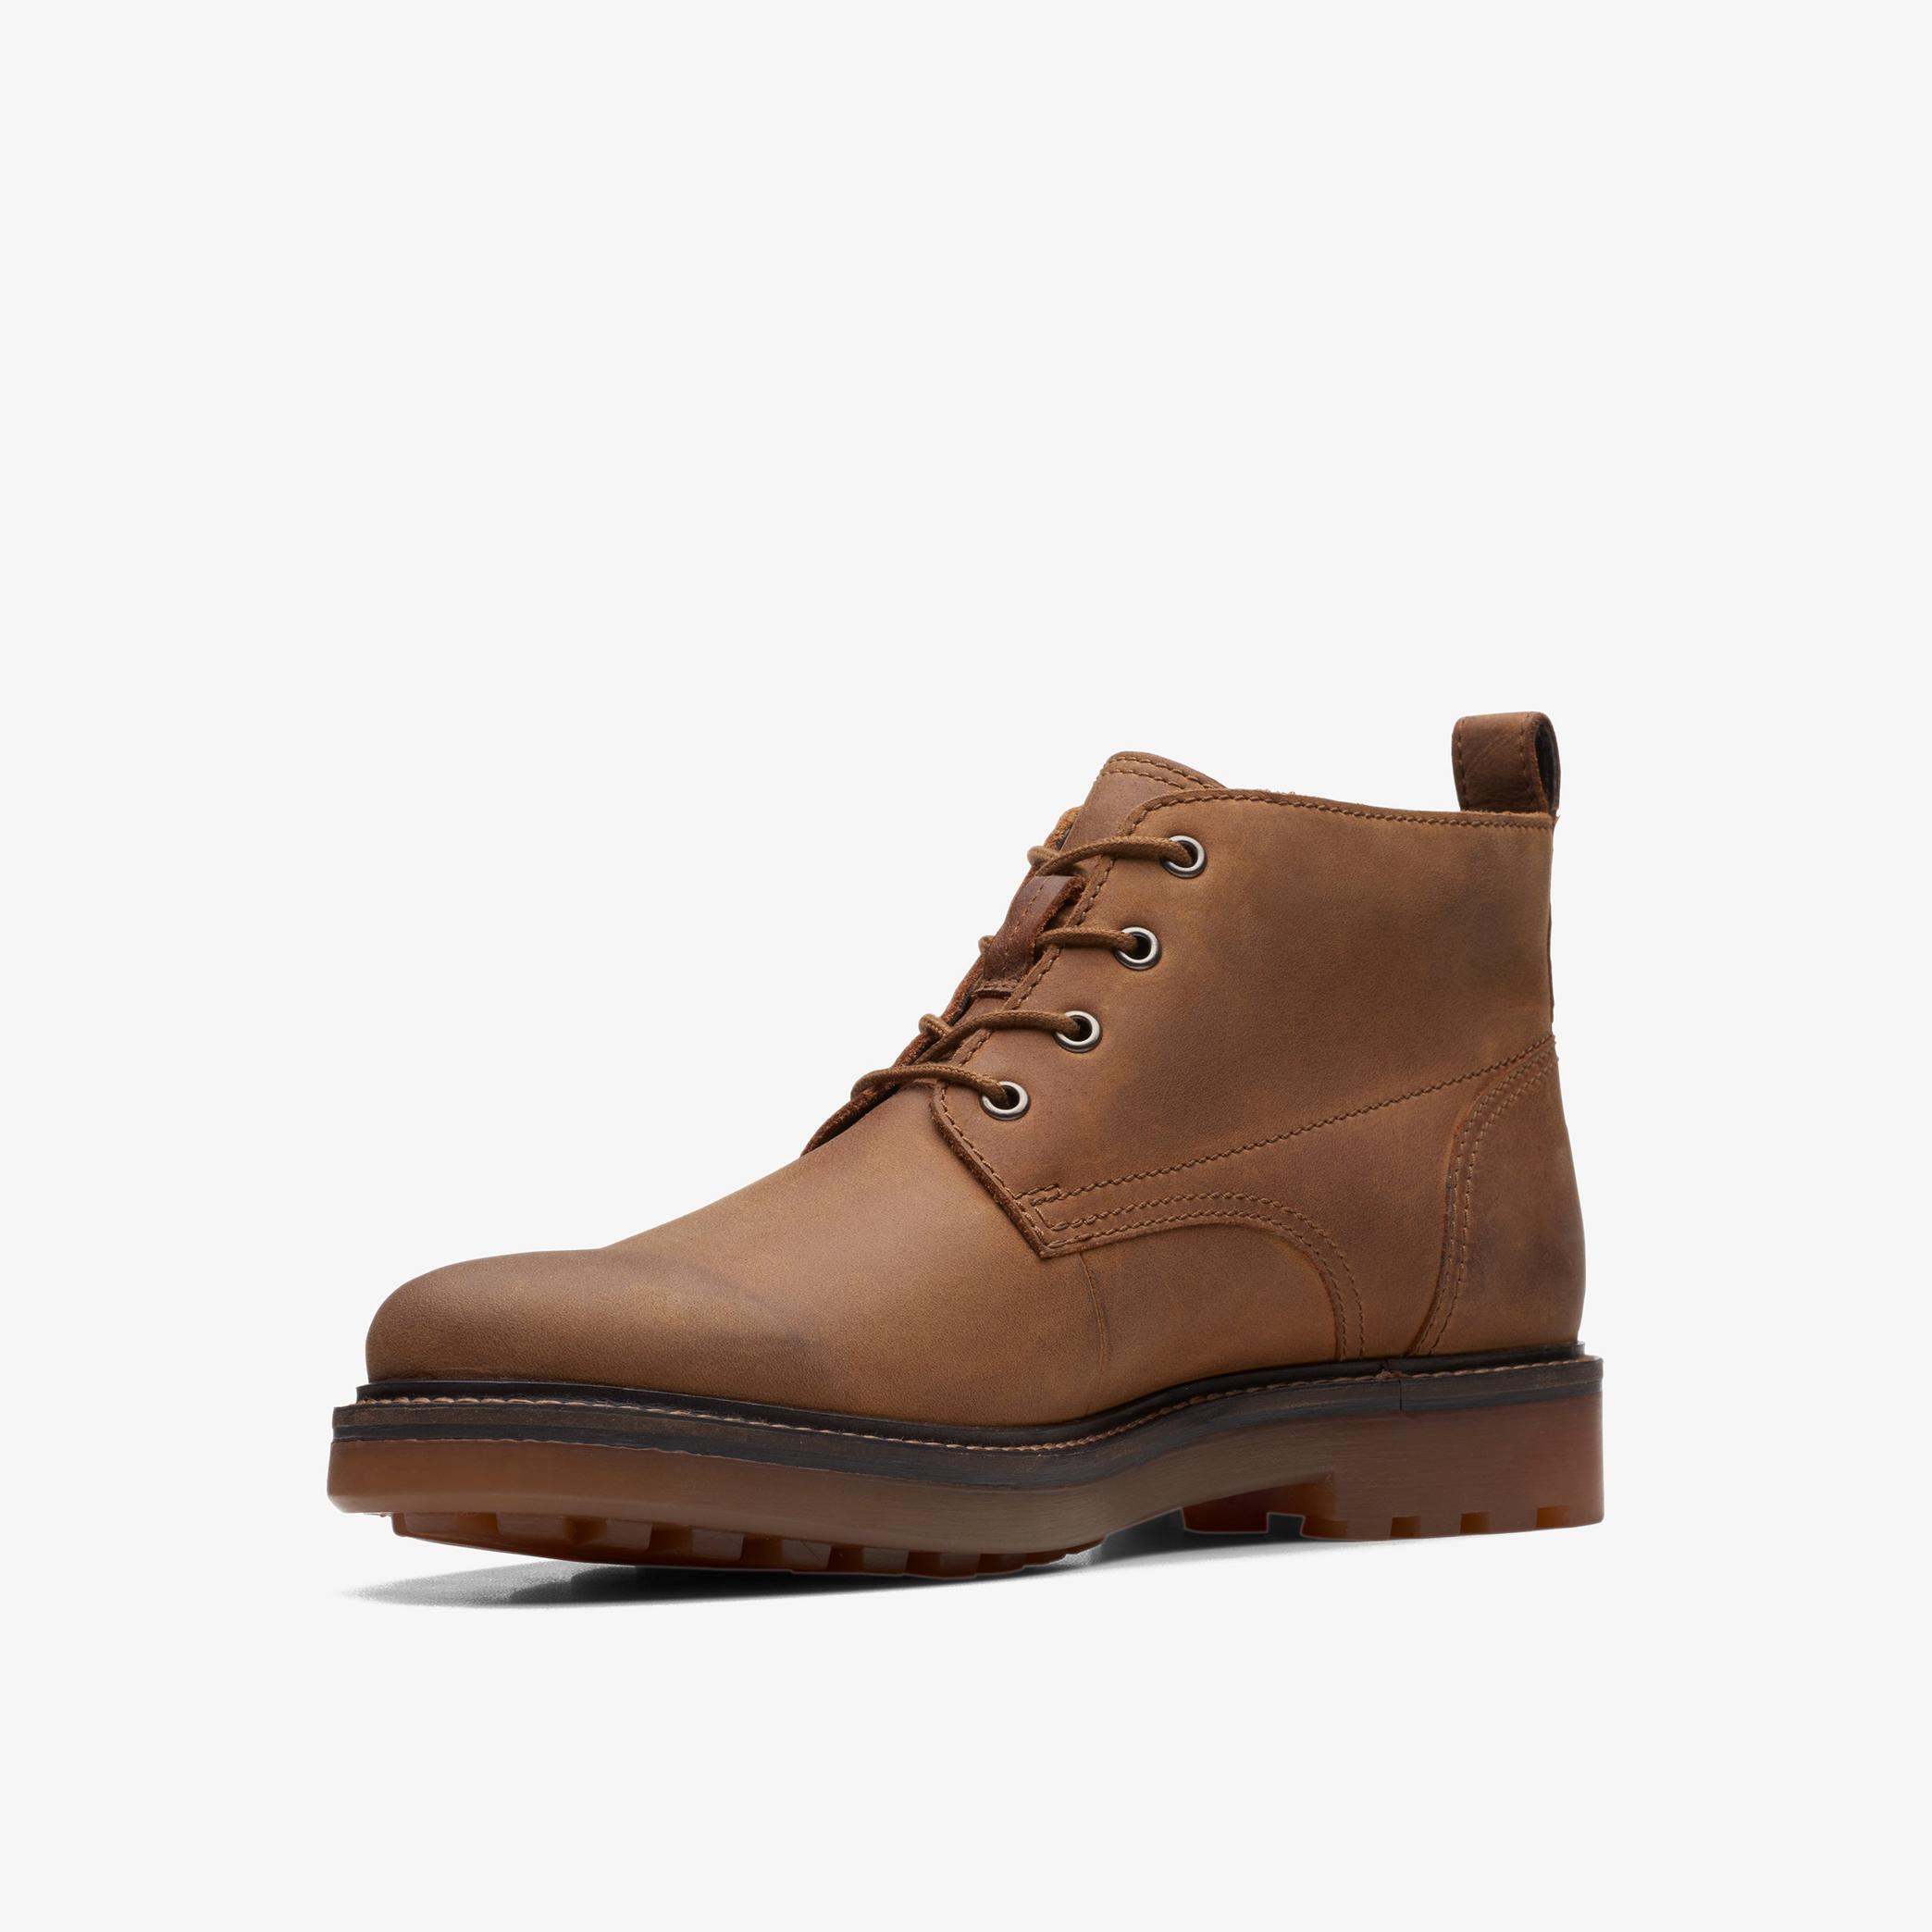 Chard Mid Dark Tan Nubuck Ankle Boots, view 4 of 6